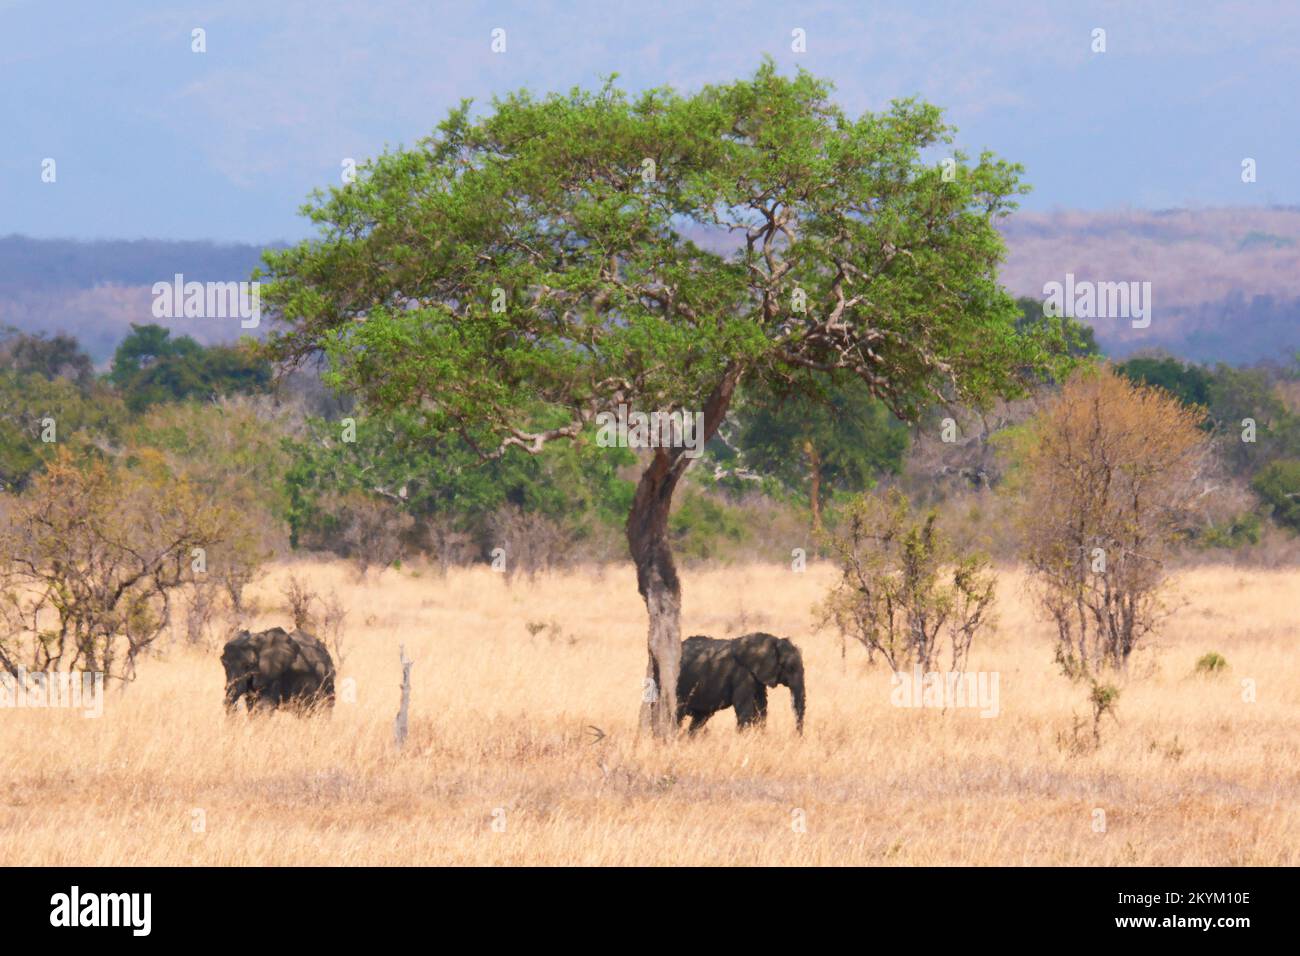 African Bush Elephants hide from the sun in the shade of a tree, seen through the shimmering heat haze  in the dry grassy plain in the midday heat of Stock Photo